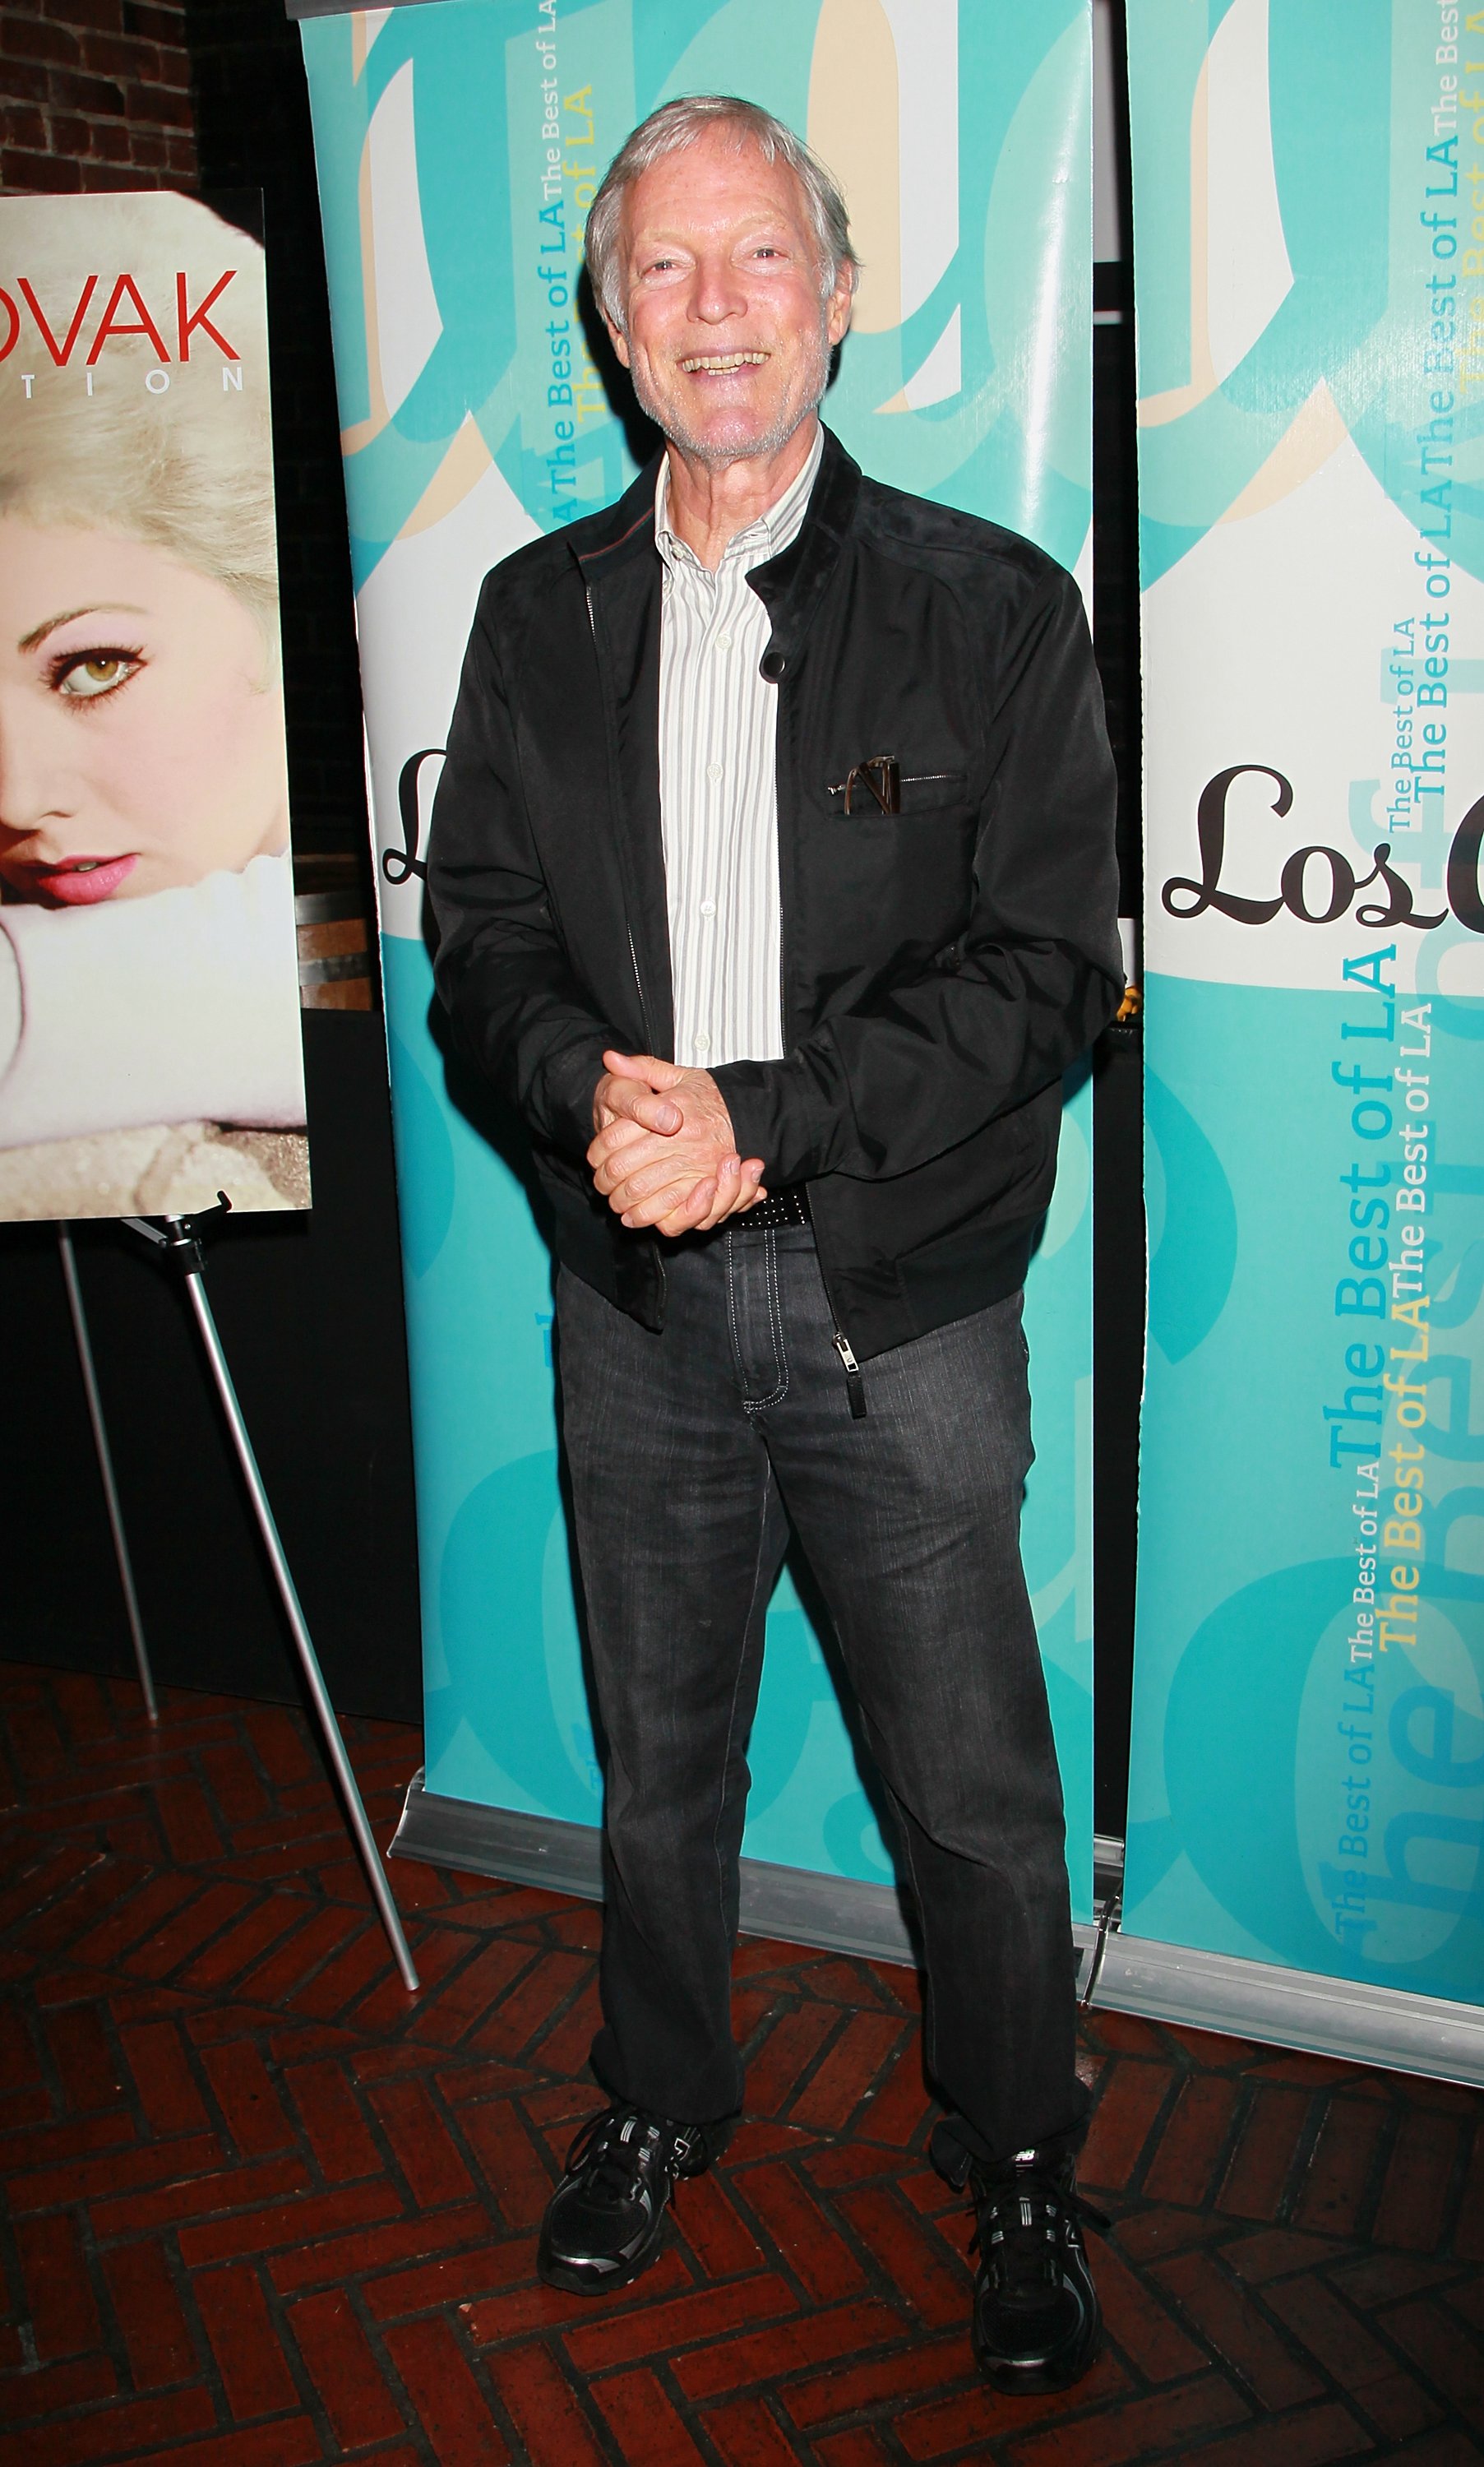 Richard Chamberlain at the "Platinum Career: A Tribute to Kim Novak" reception on July 30, 2010, in Hollywood, California. | Source: Getty Images